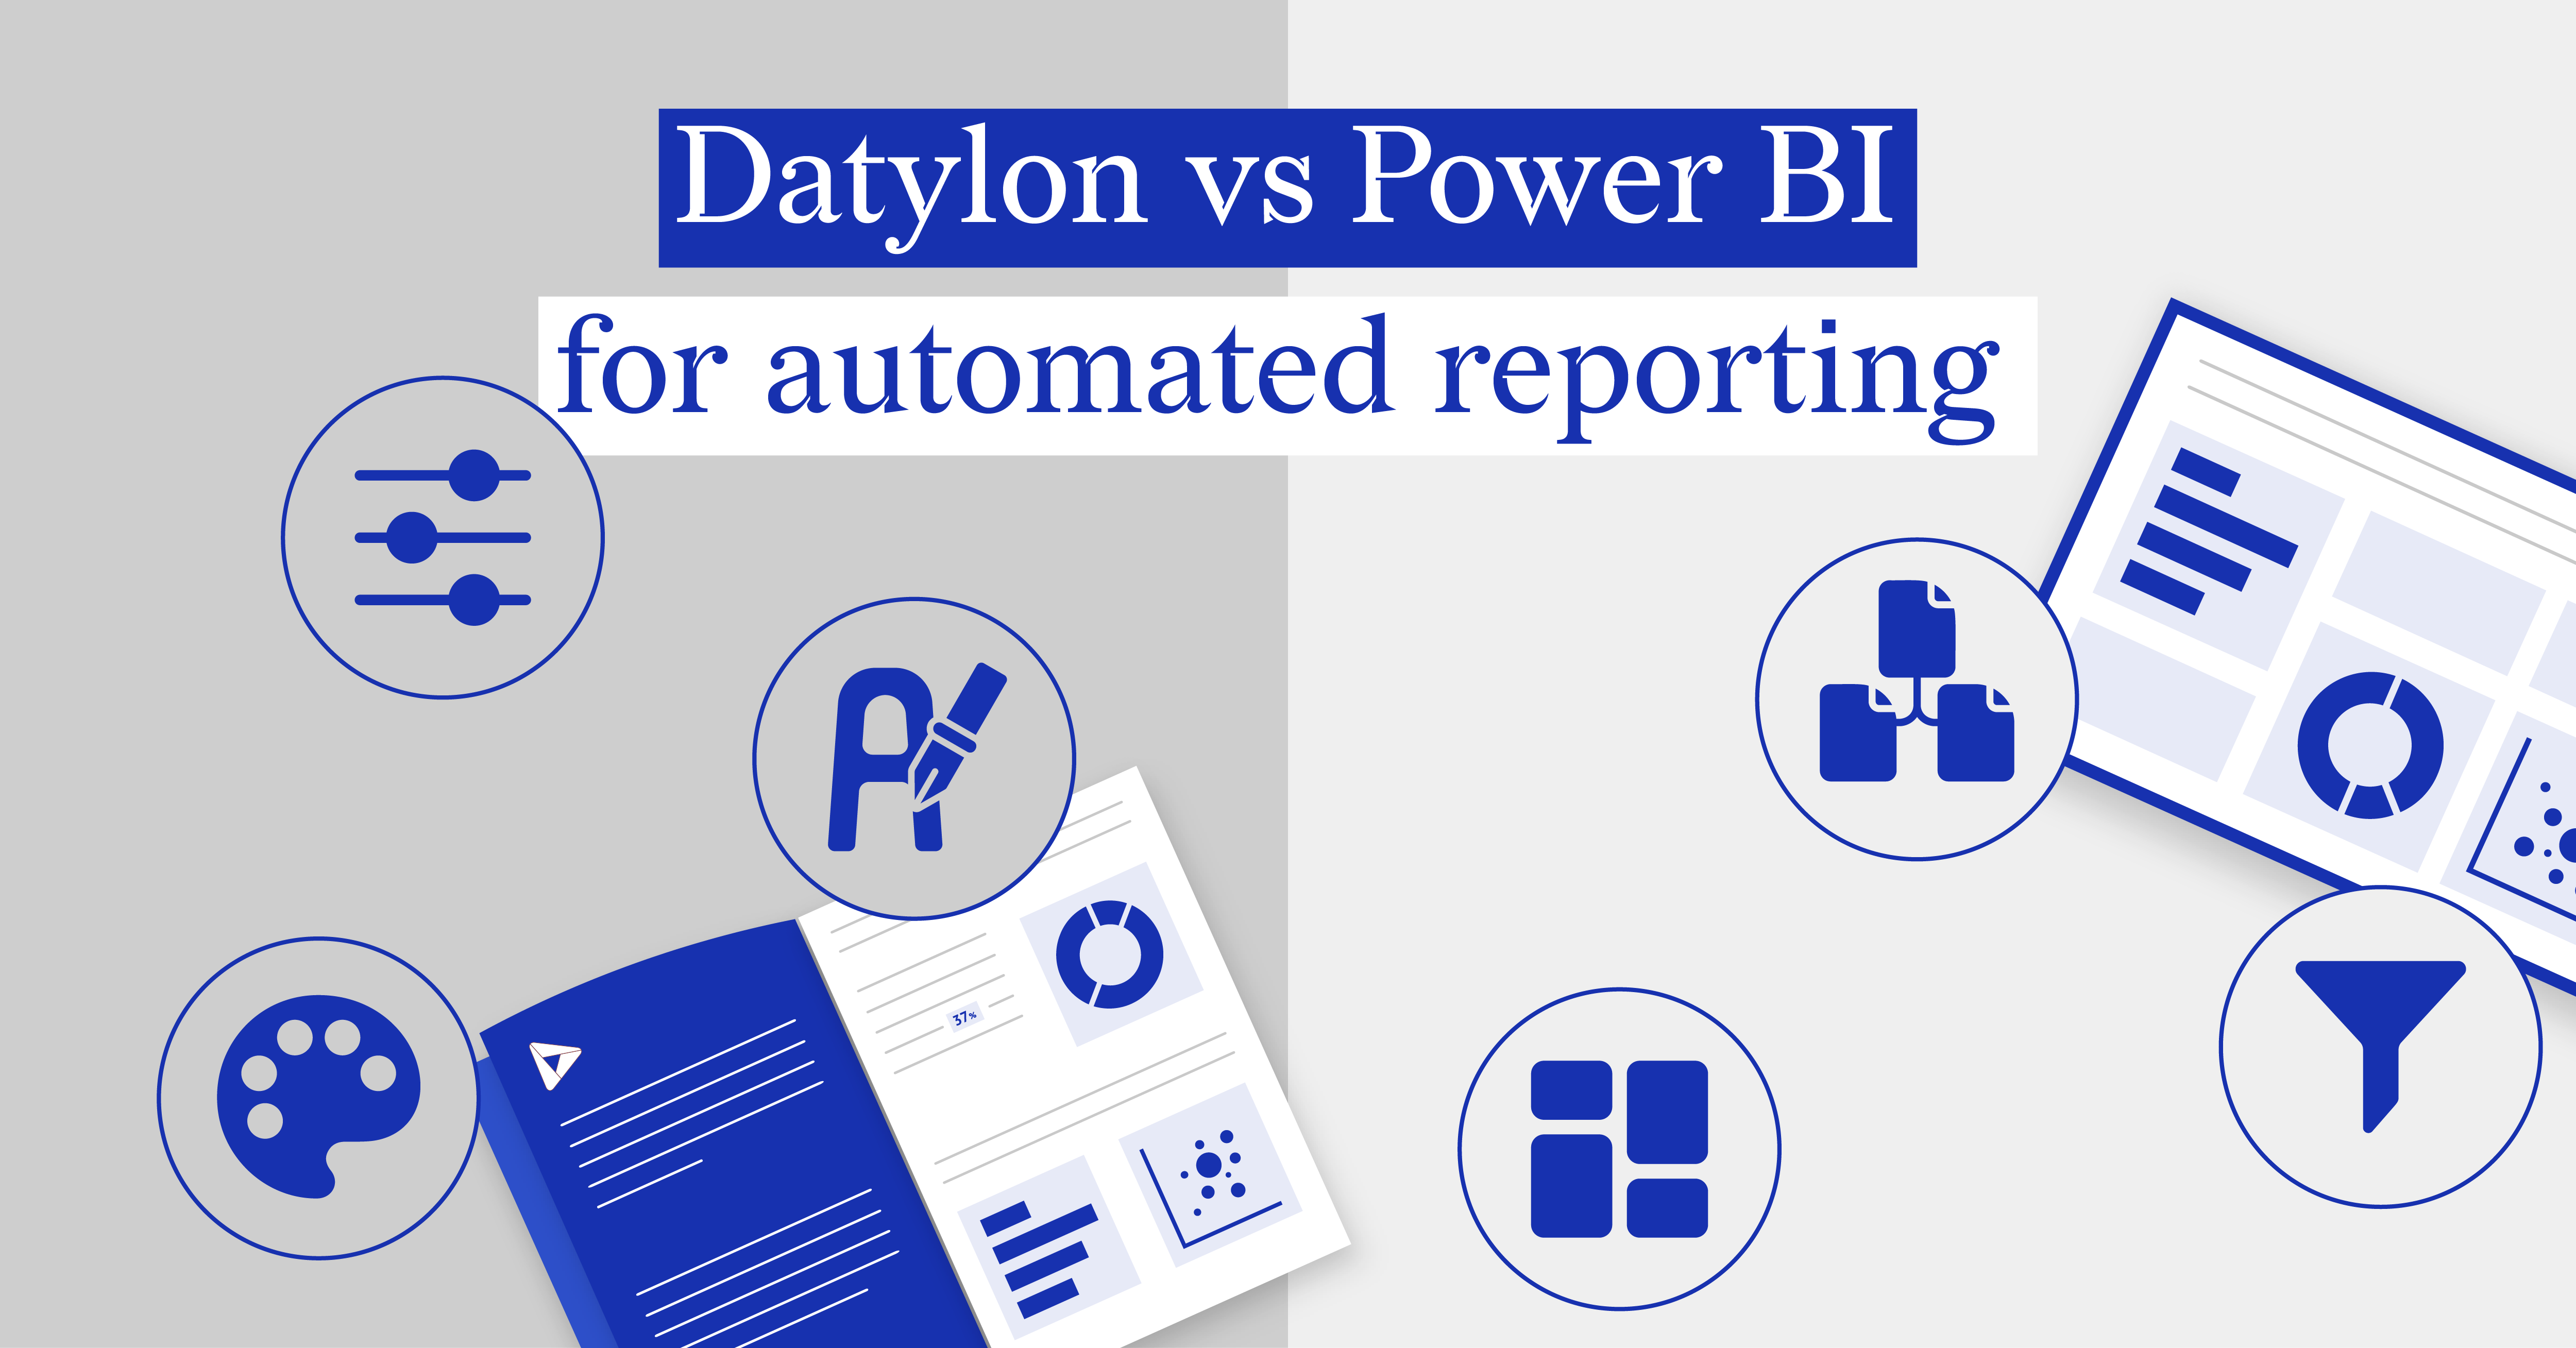 Comparison Image: On the left, explore Datylon's advantages with unlimited styling options. On the right, discover Power BI's strengths, featuring the ability to analyze, filter, and process data. The background is divided into two greyscale parts, distinguishing between Datylon and Power BI functionalities.